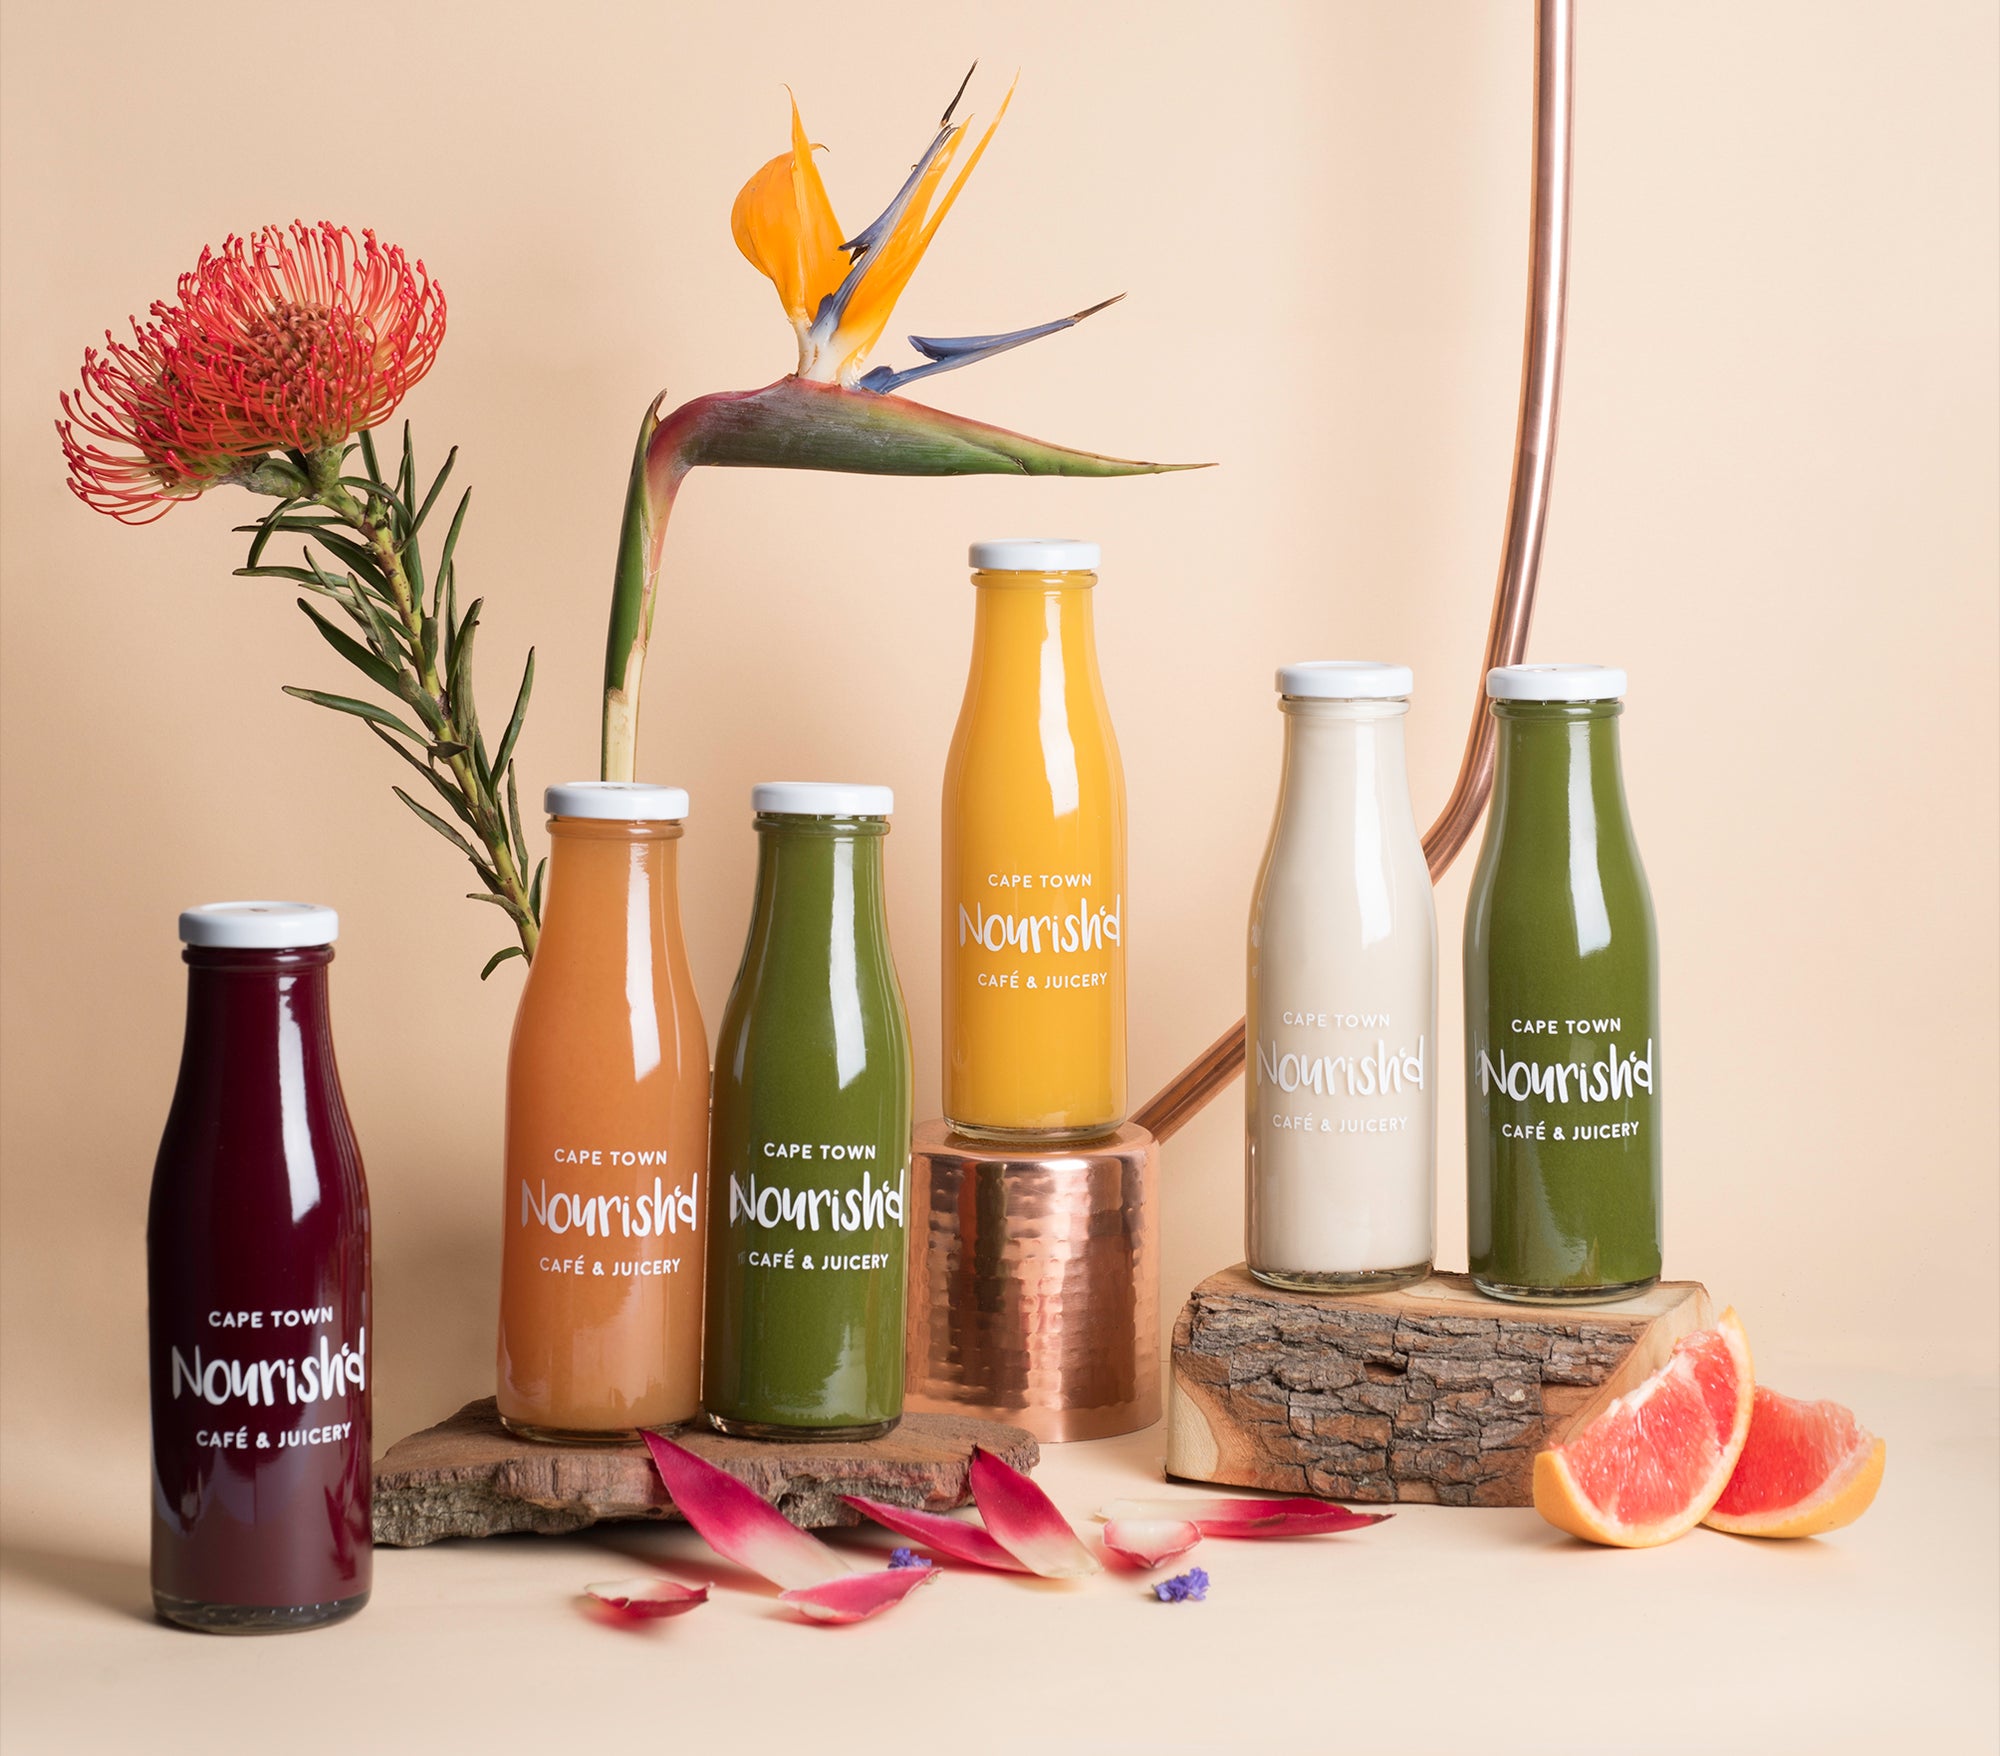 5 Reasons to do the Nourish’d Juice Fast